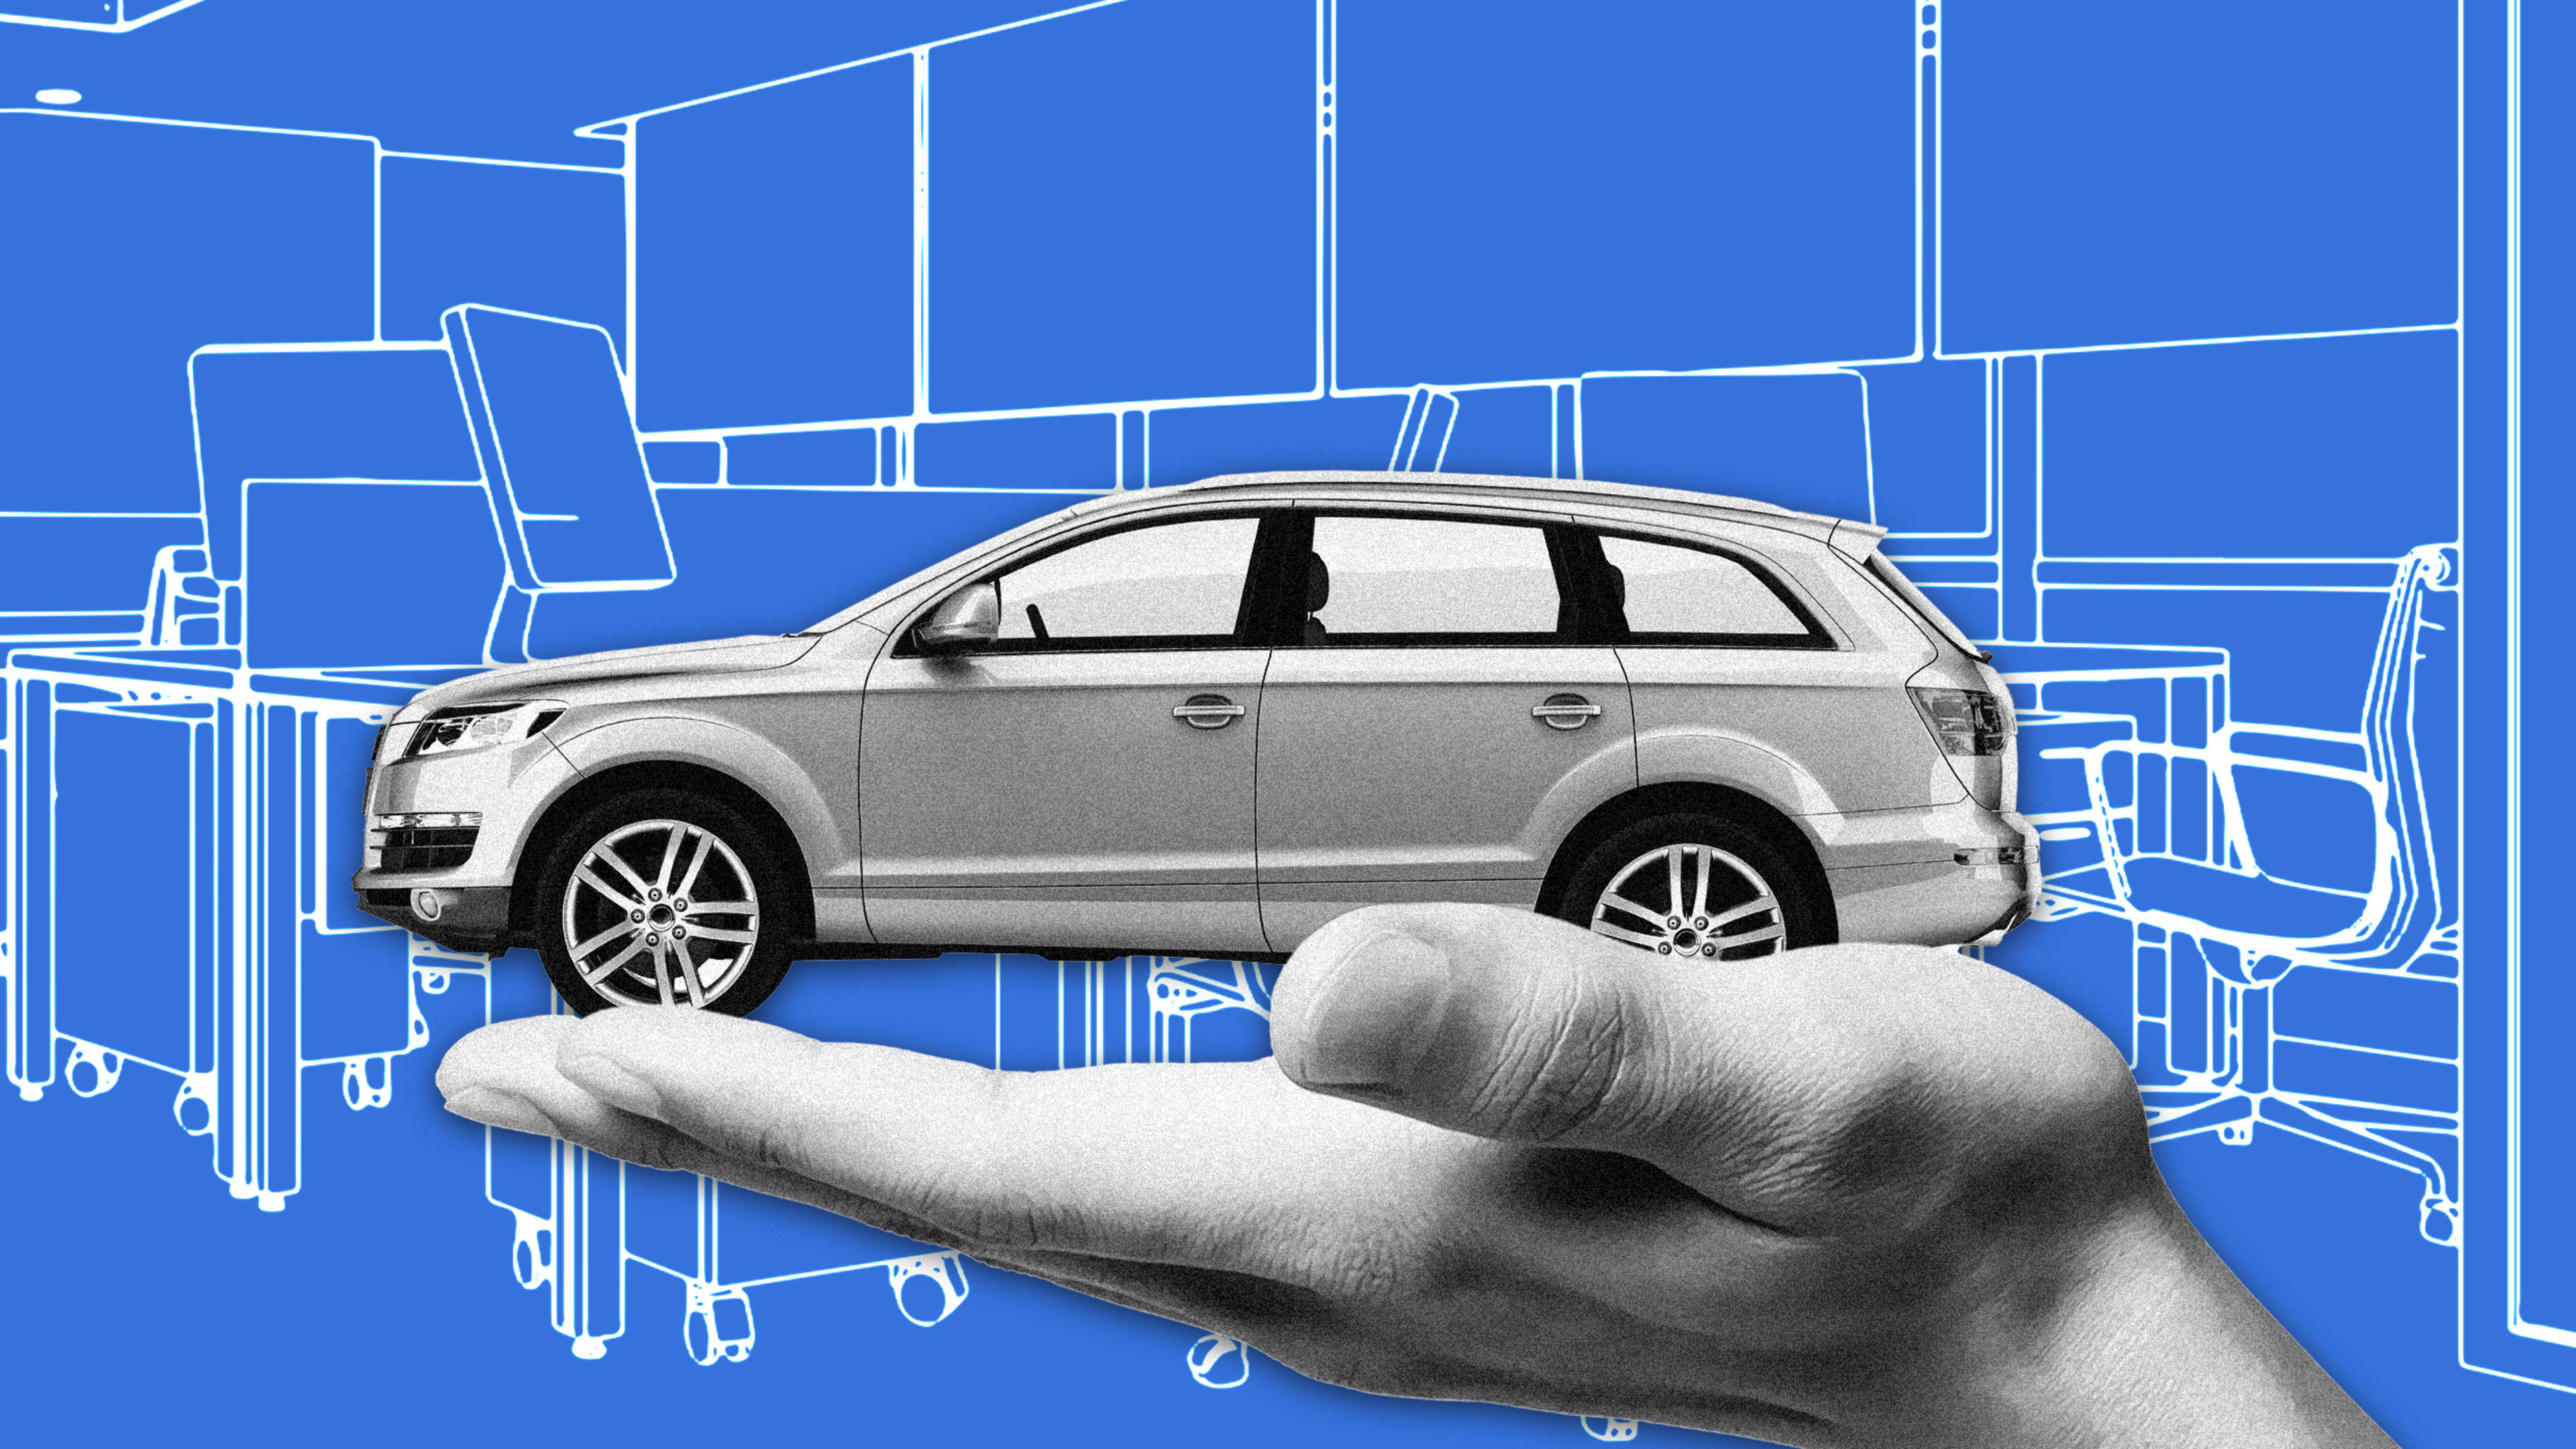 Cisco is betting your car will soon become an extension of your home office